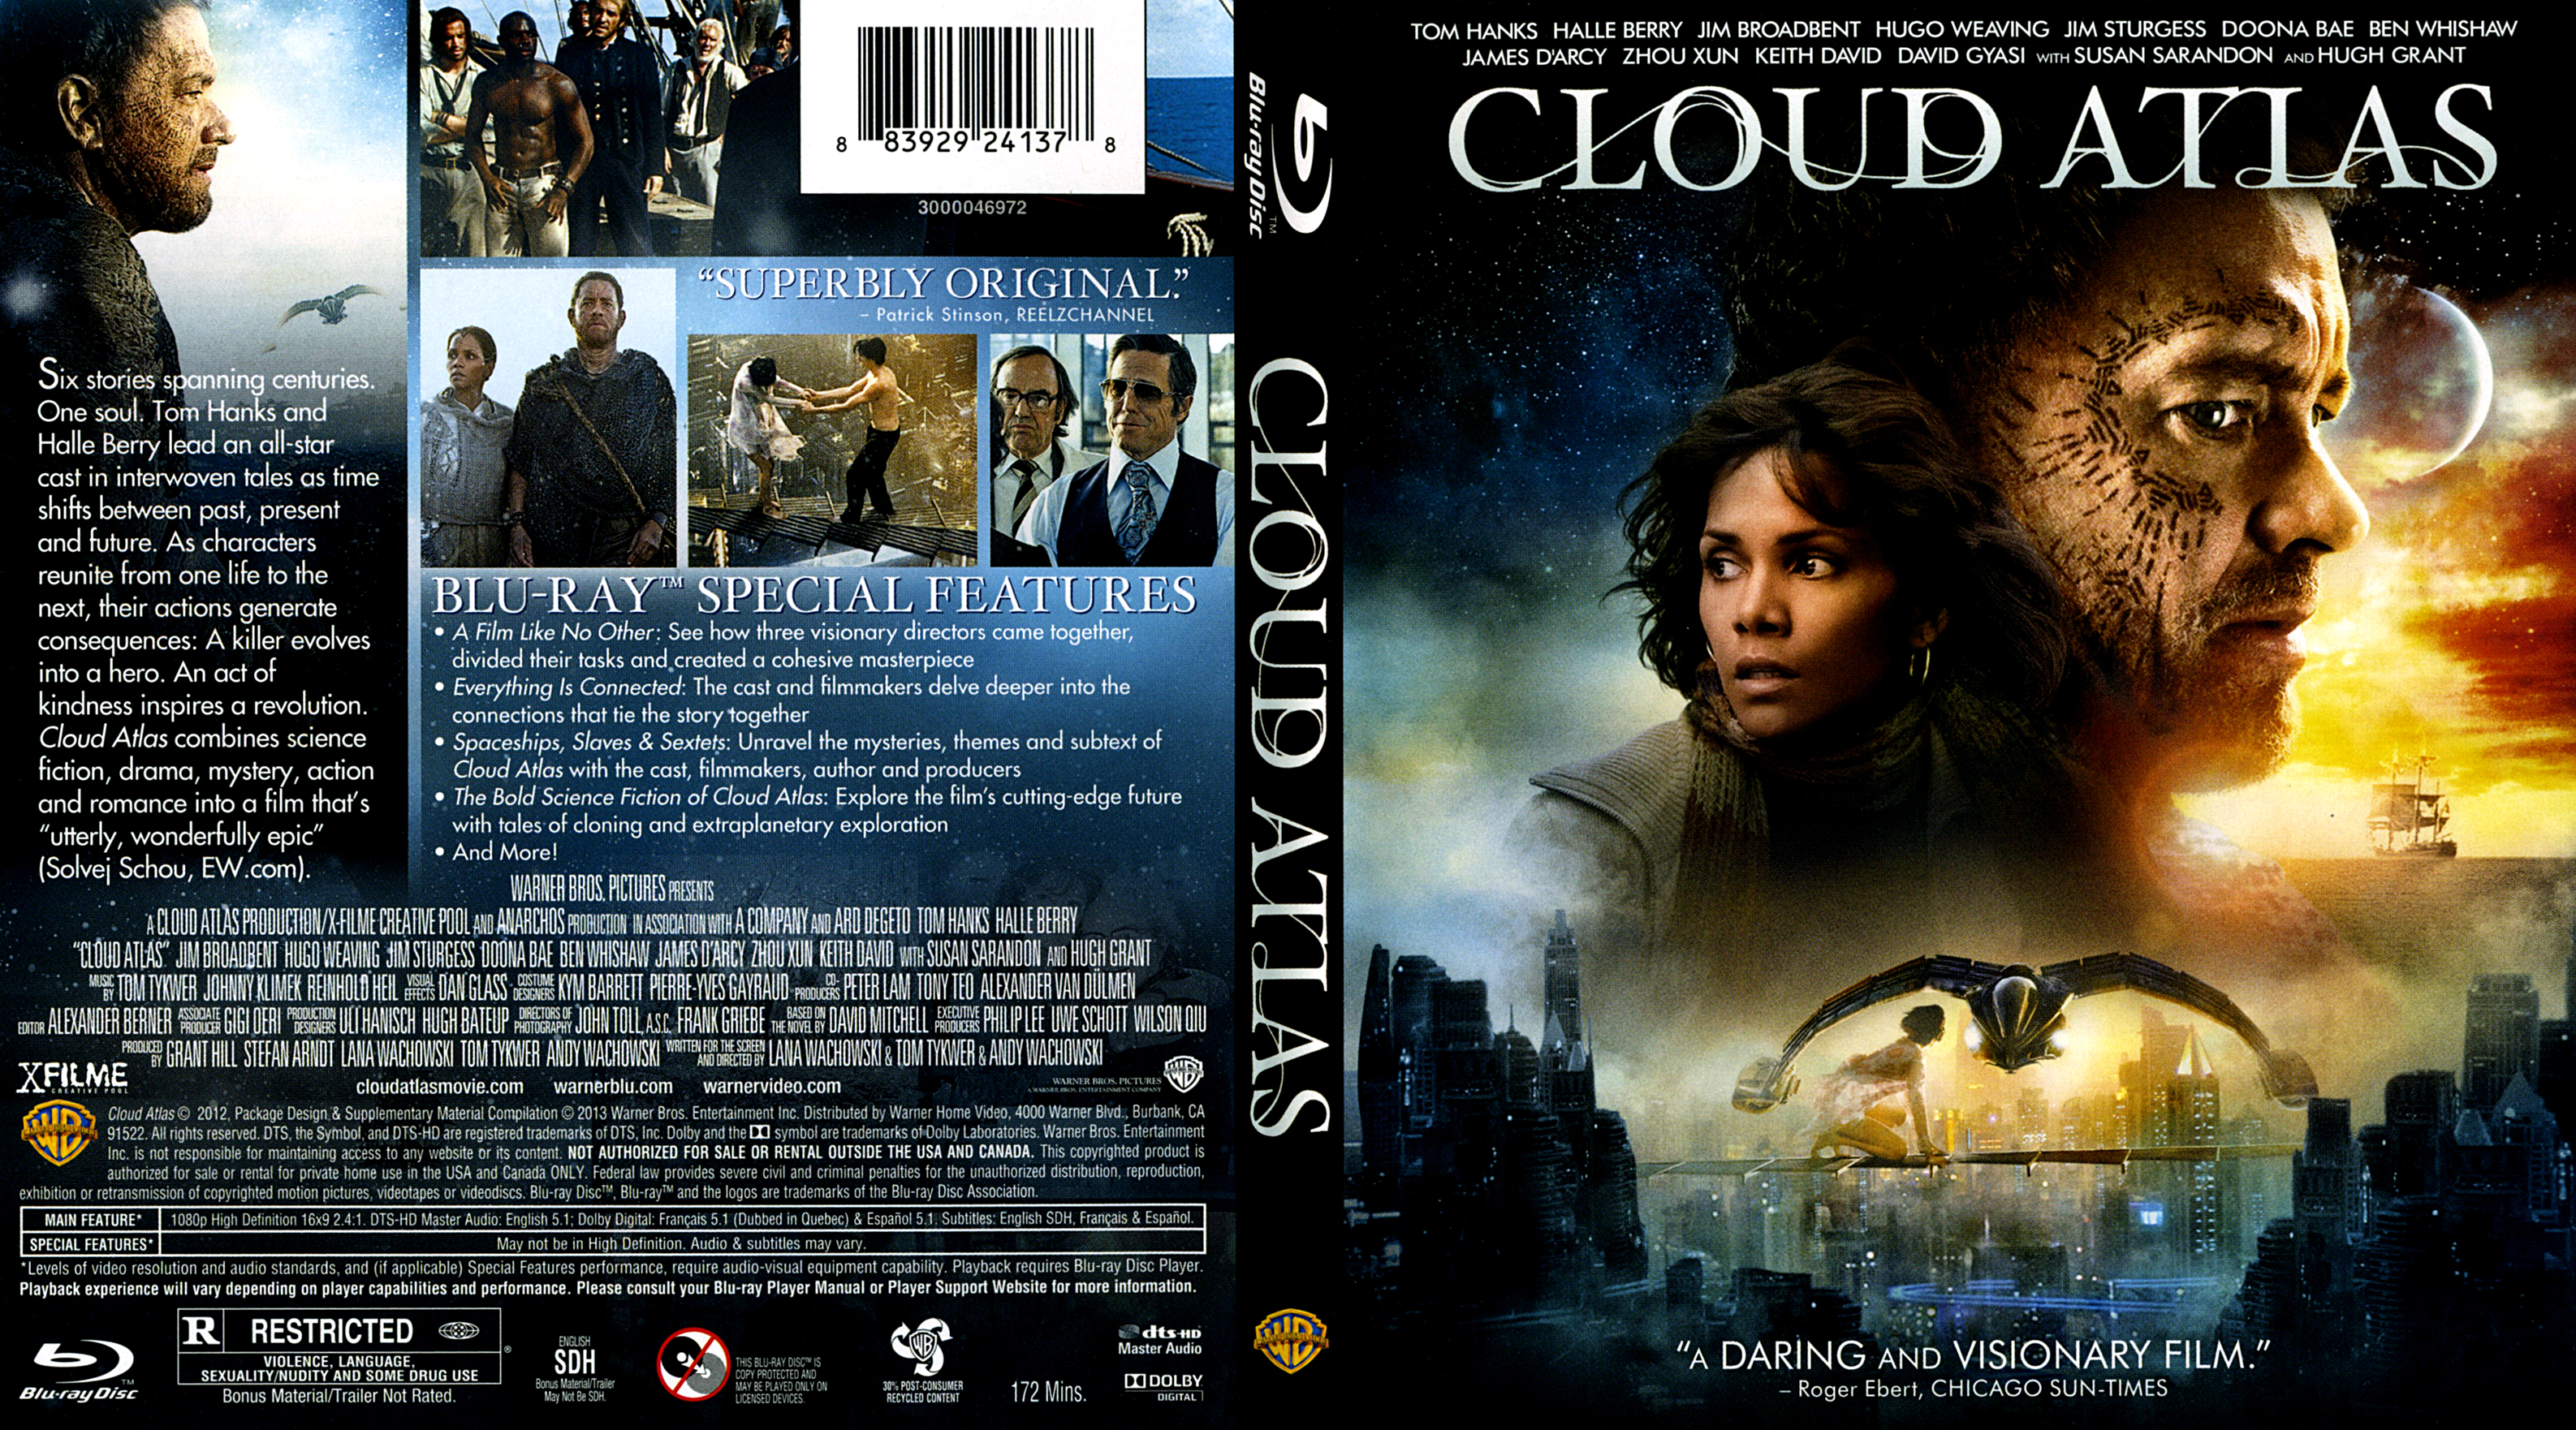 Cloud Atlas Blu Ray Covers Cover Century Over 500 000 Album Art Covers For Free